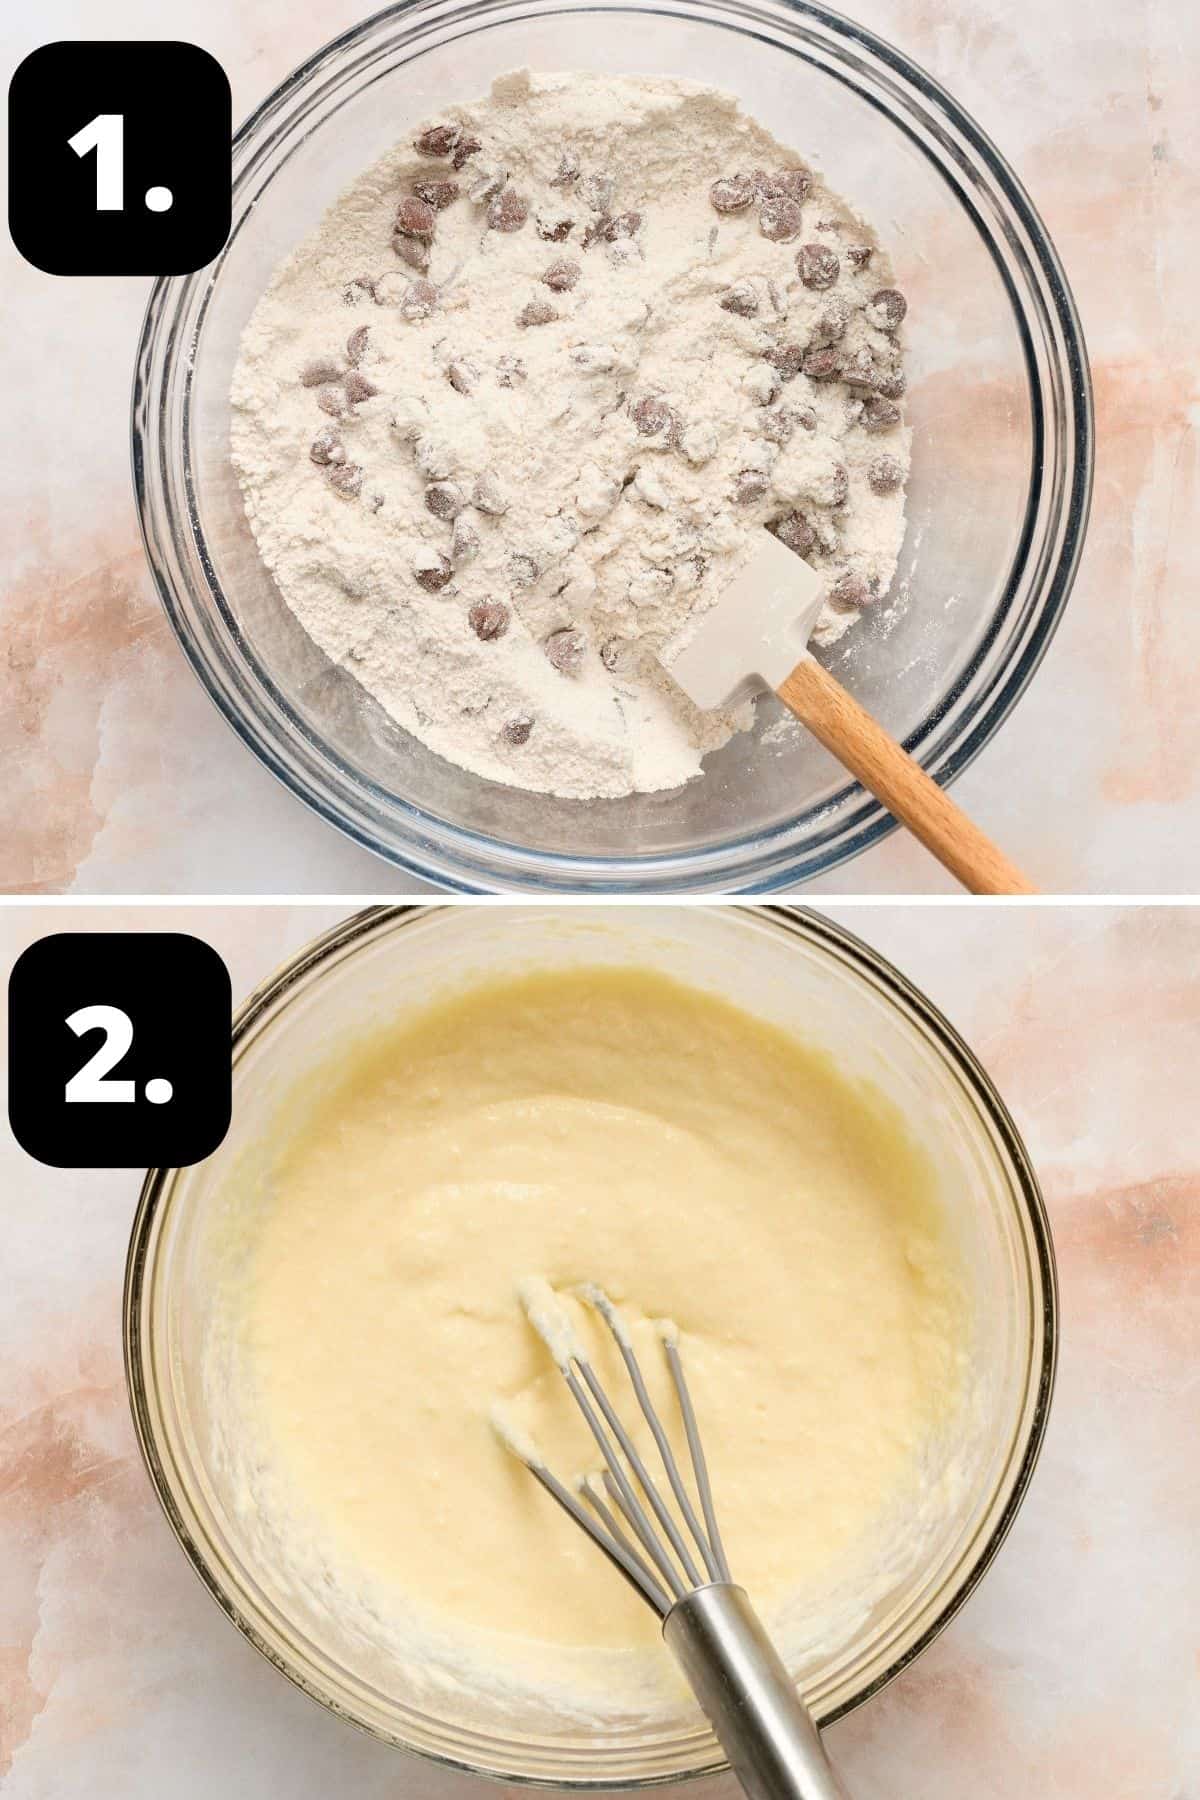 Steps 1-2 of preparing this recipe: dry ingredients and chocolate chips in a bowl and the wet ingredients in another bowl.